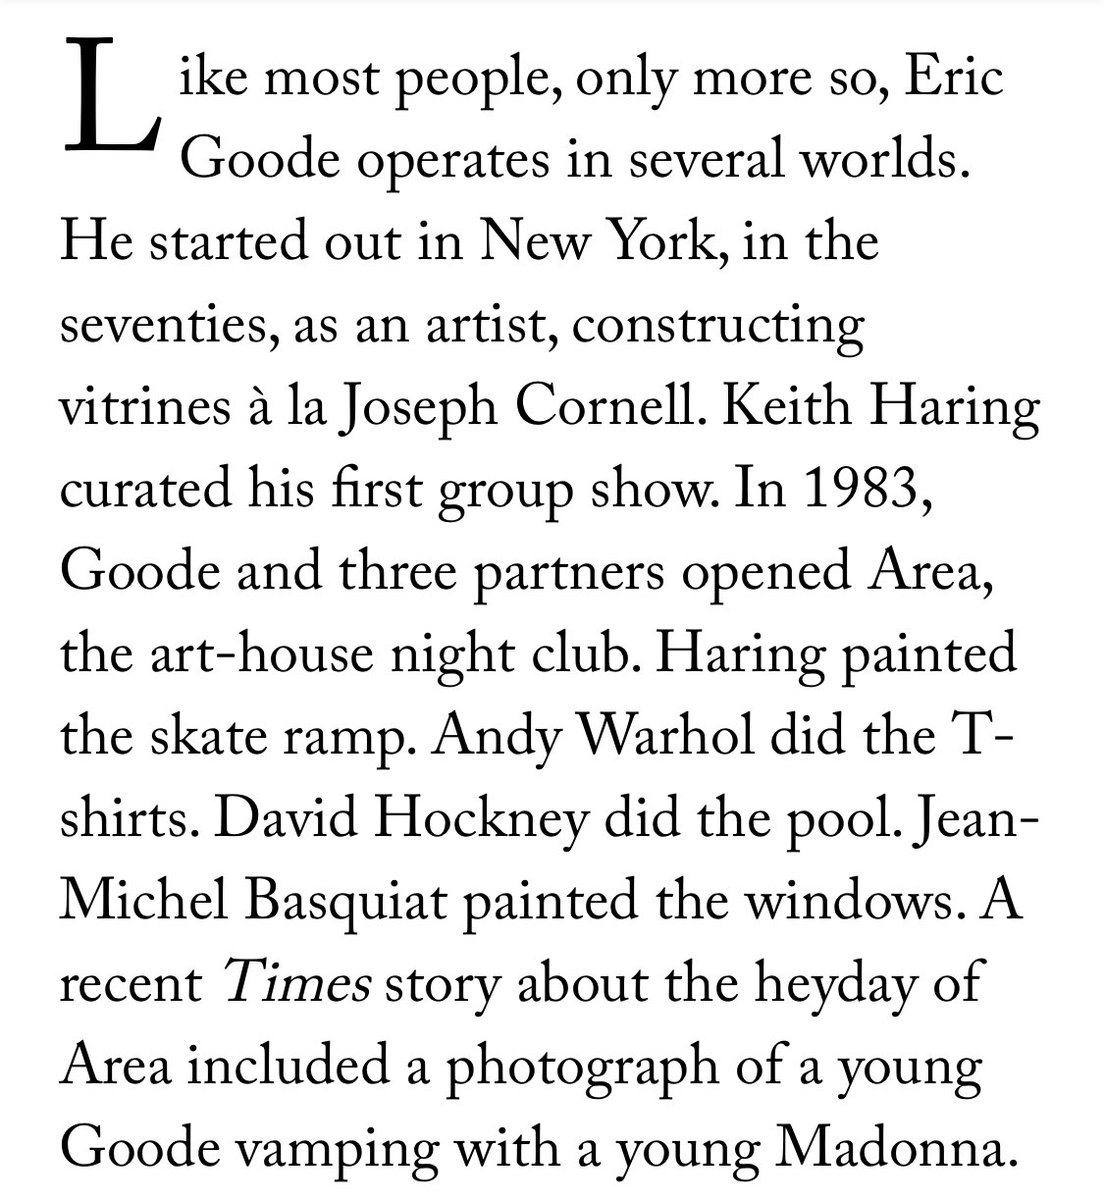 4. Eric Goode, the documentarian, is a quirky character in his own right.  http://www.newyorker.com/magazine/2012/01/23/slow-and-steady